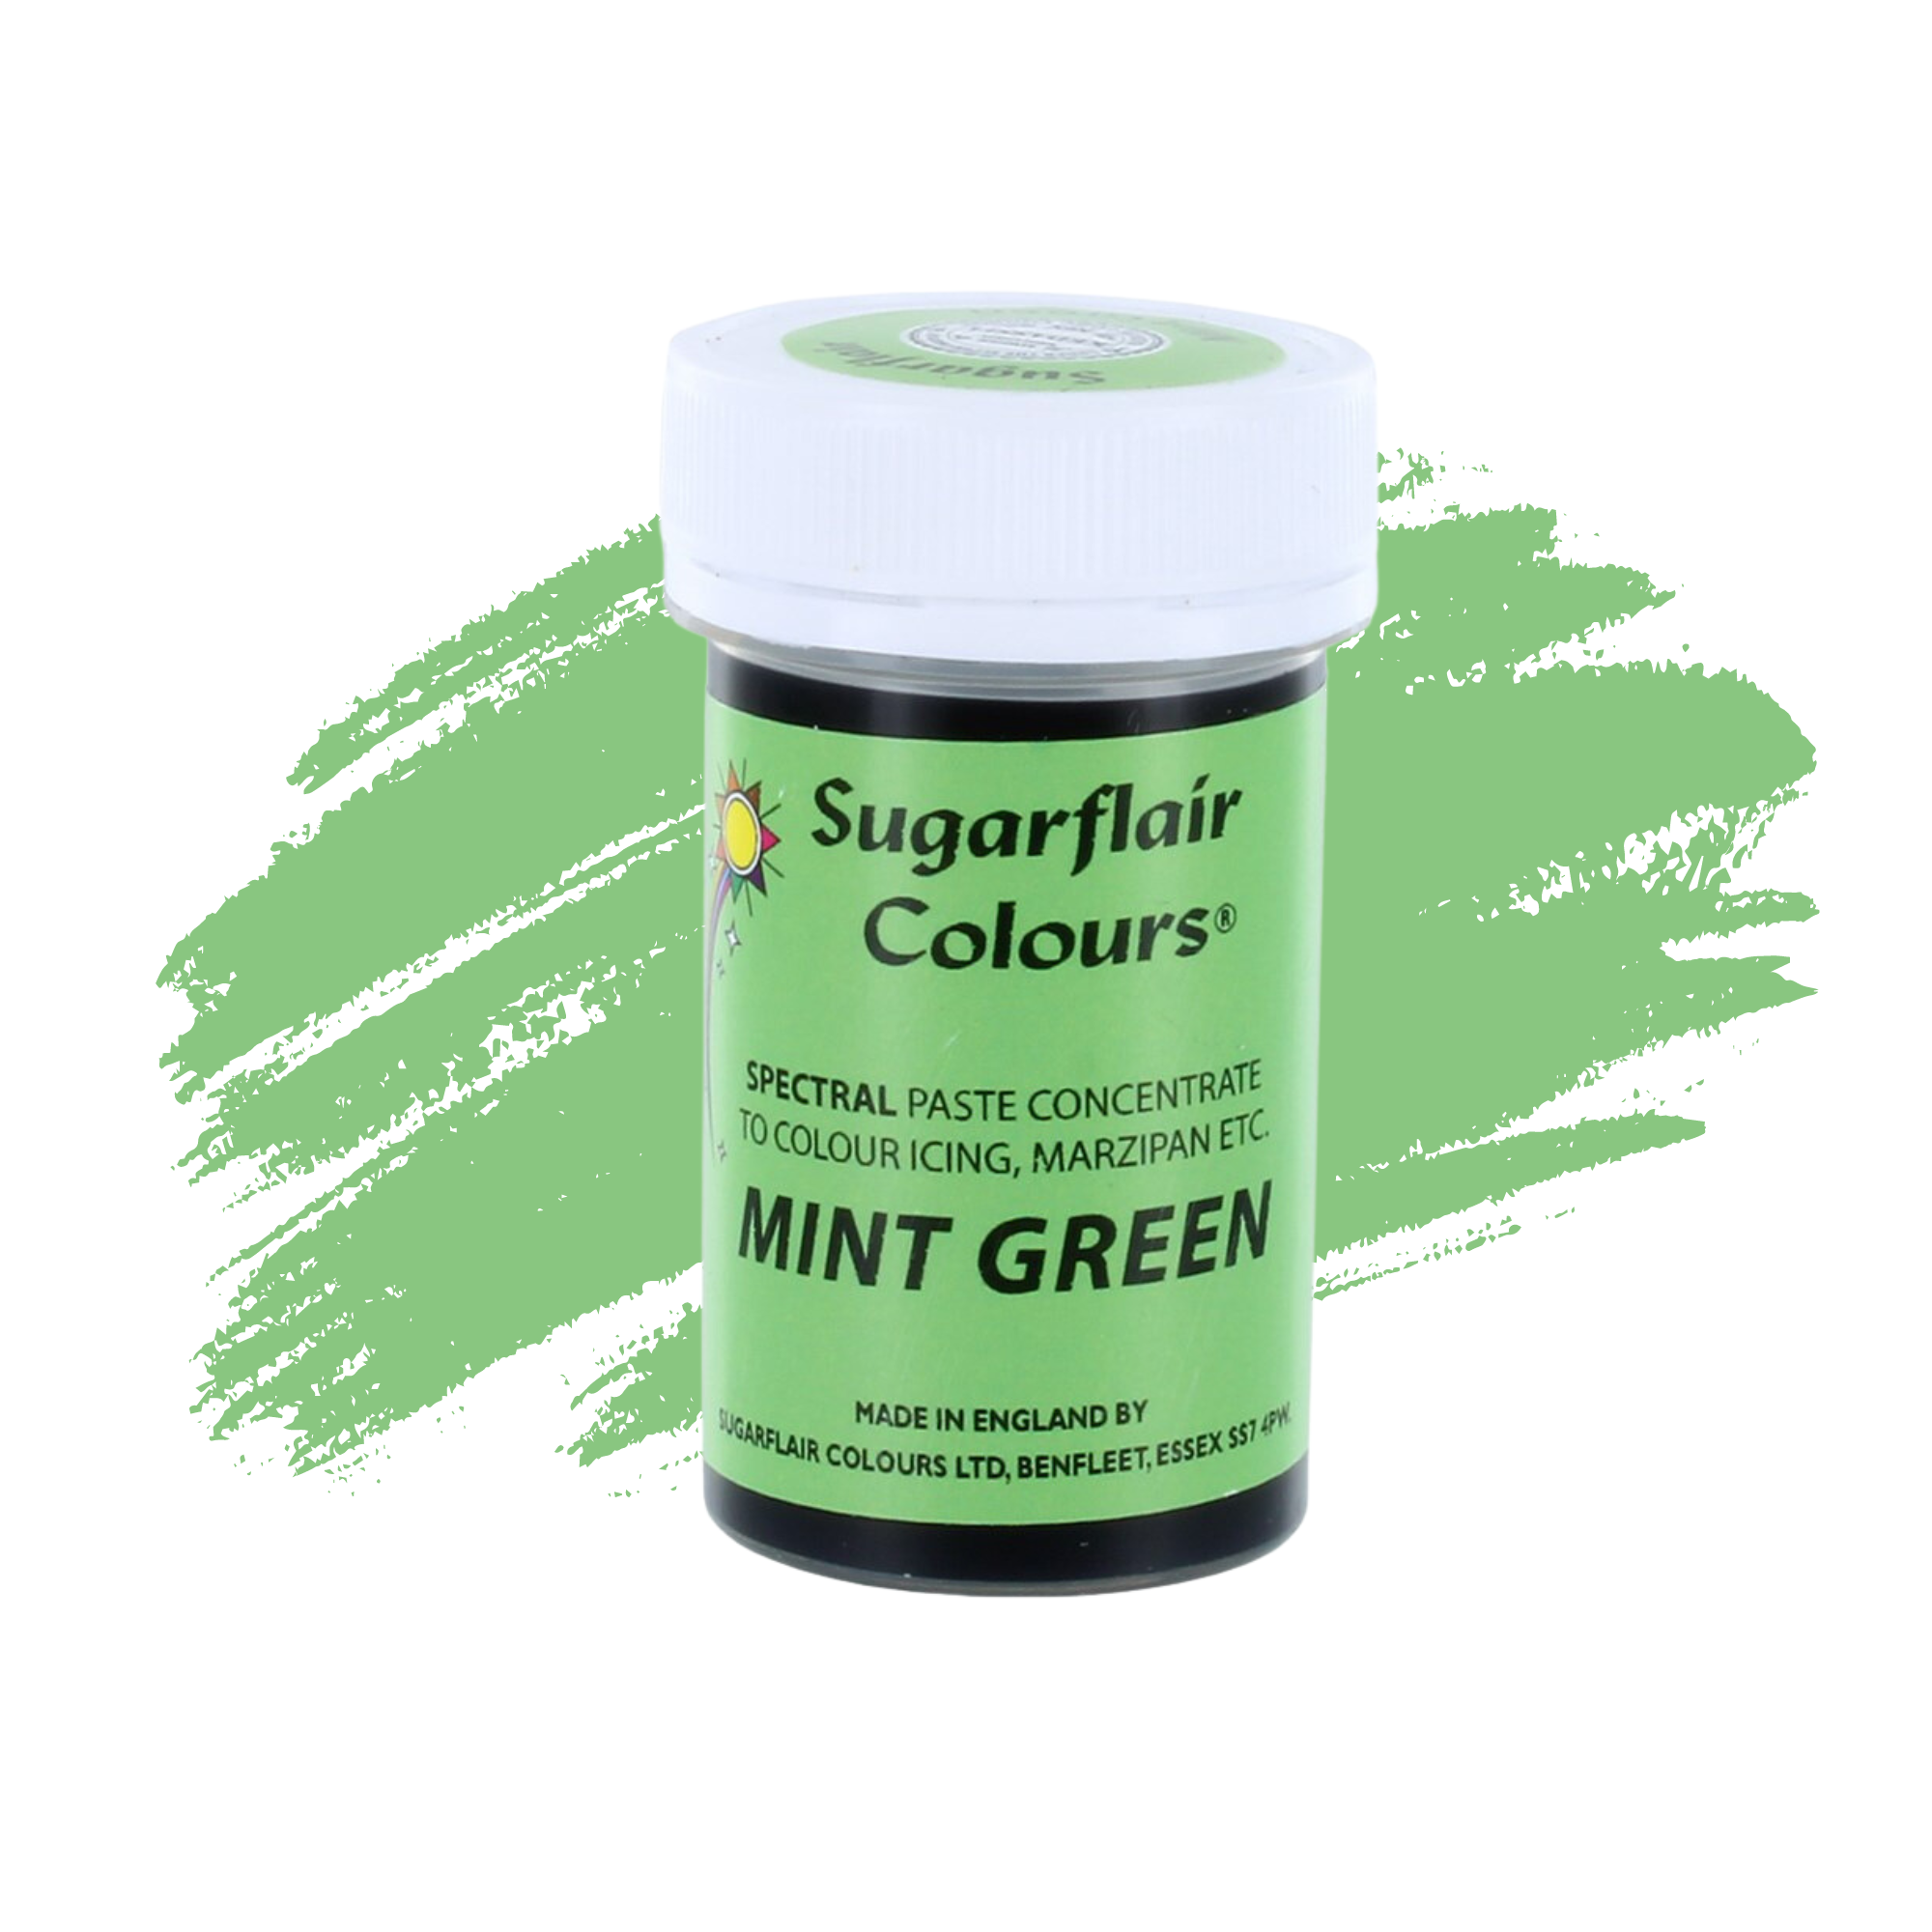 Sugarflair Paste Colours Concentrated Food Colouring - Spectral Mint Green - 25g